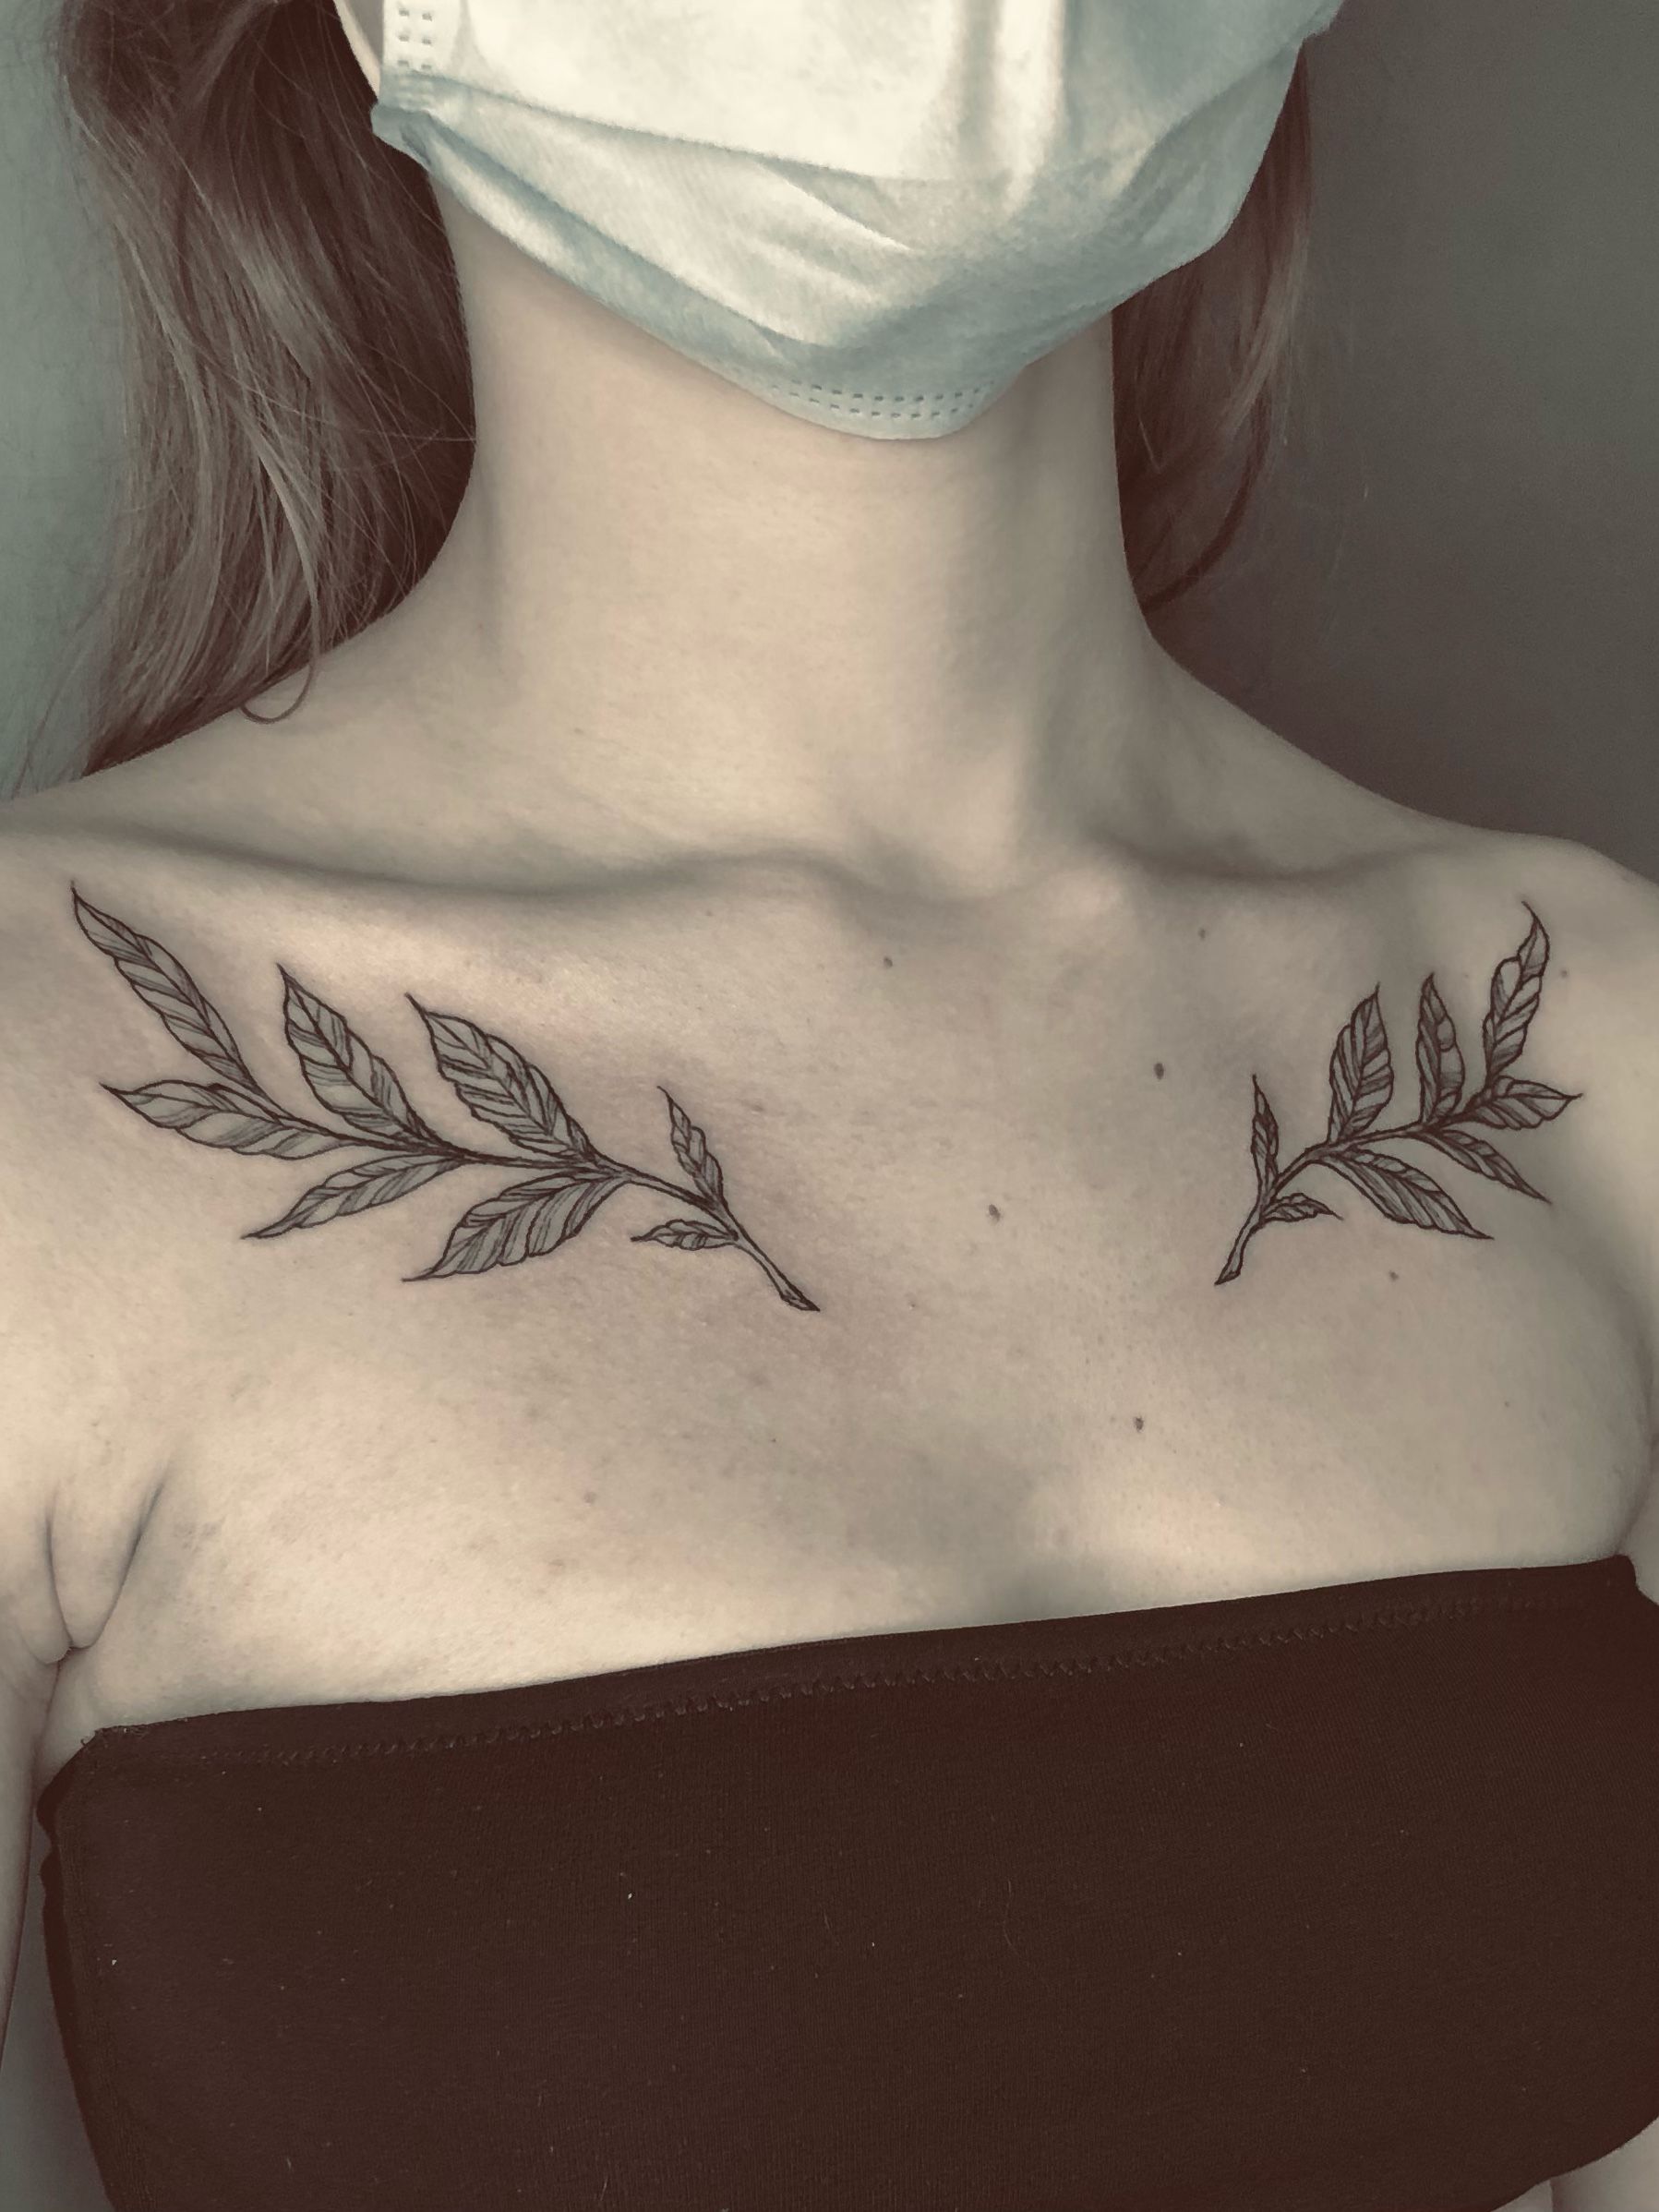 Laurel Wreath Tattoo Images Browse 1857 Stock Photos  Vectors Free  Download with Trial  Shutterstock